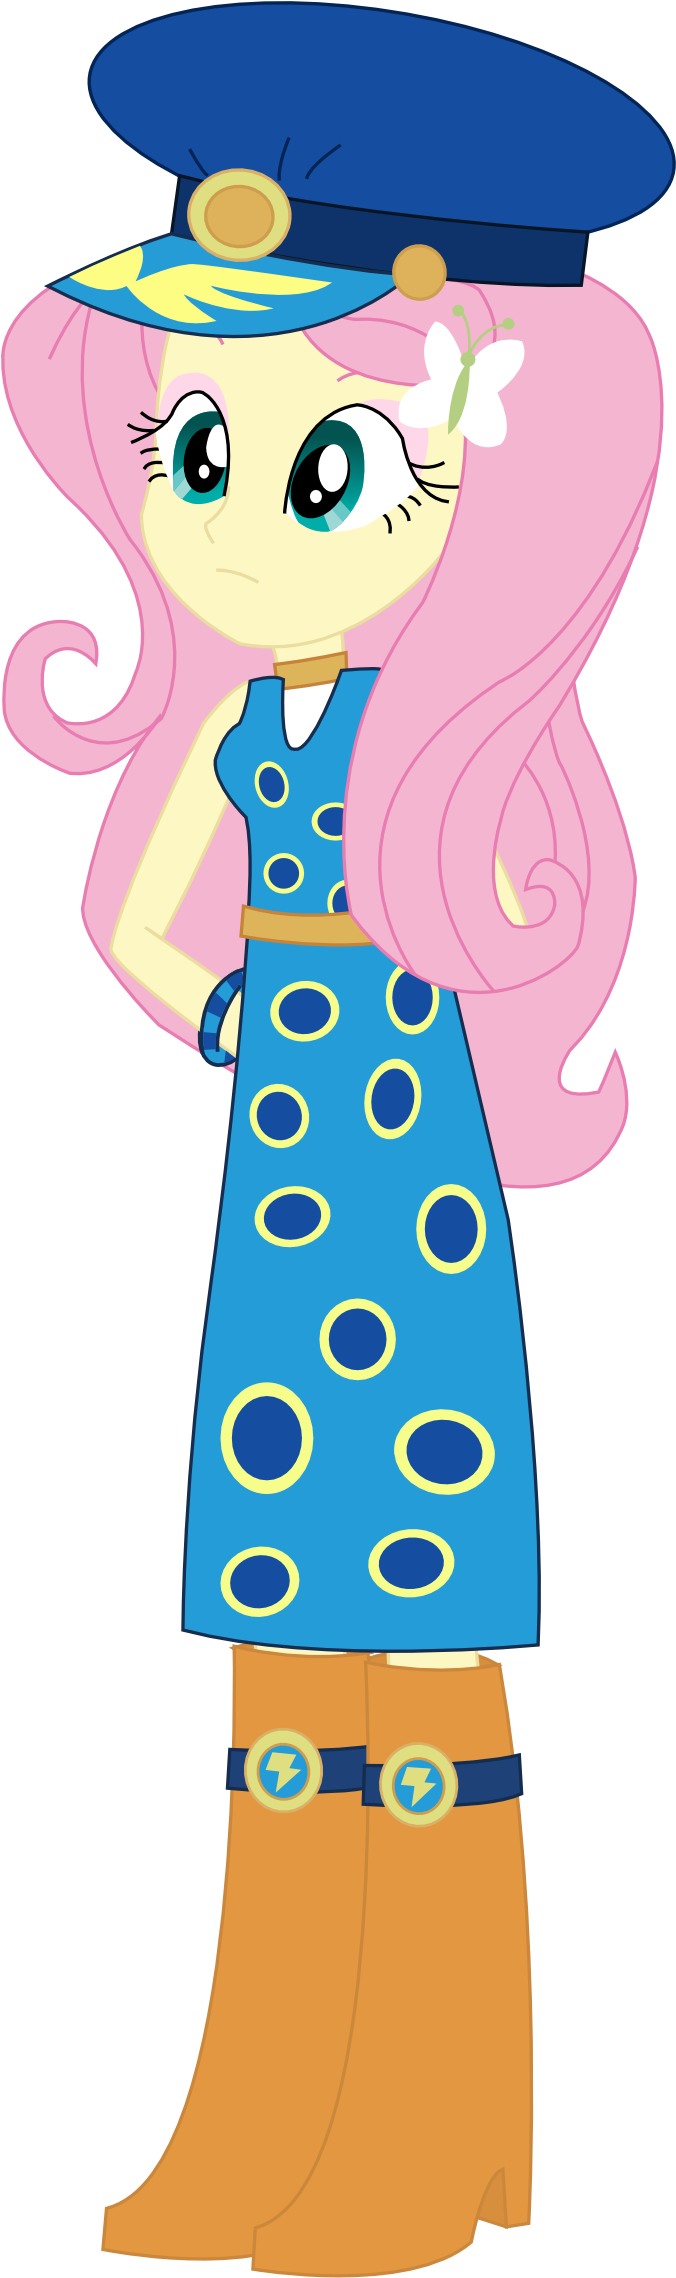 Sketchmcreations Equestria Girls Fluttershy By Sketchmcreations - Equestria Girls Fluttershy Gala (783x2333)